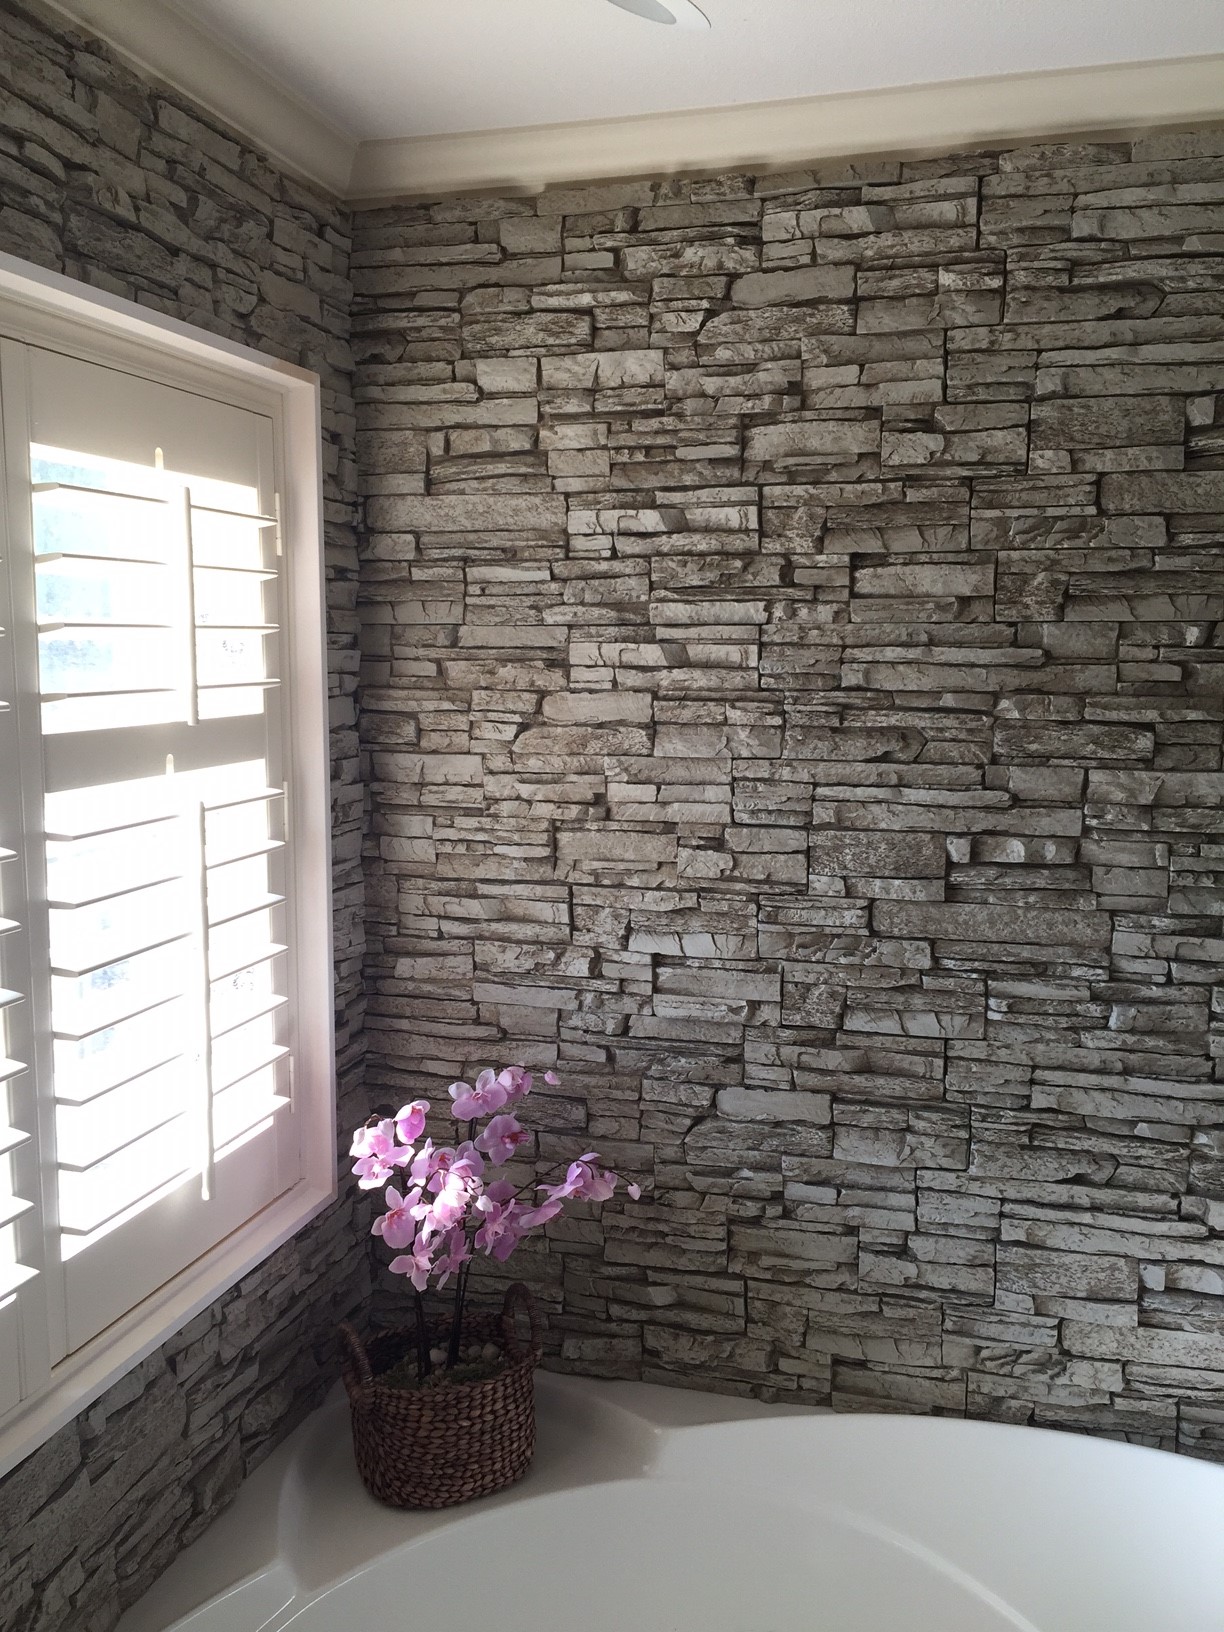 Gorgeous bathtub wall surround created with Norwich Stacked Stone panels in a light gray color.